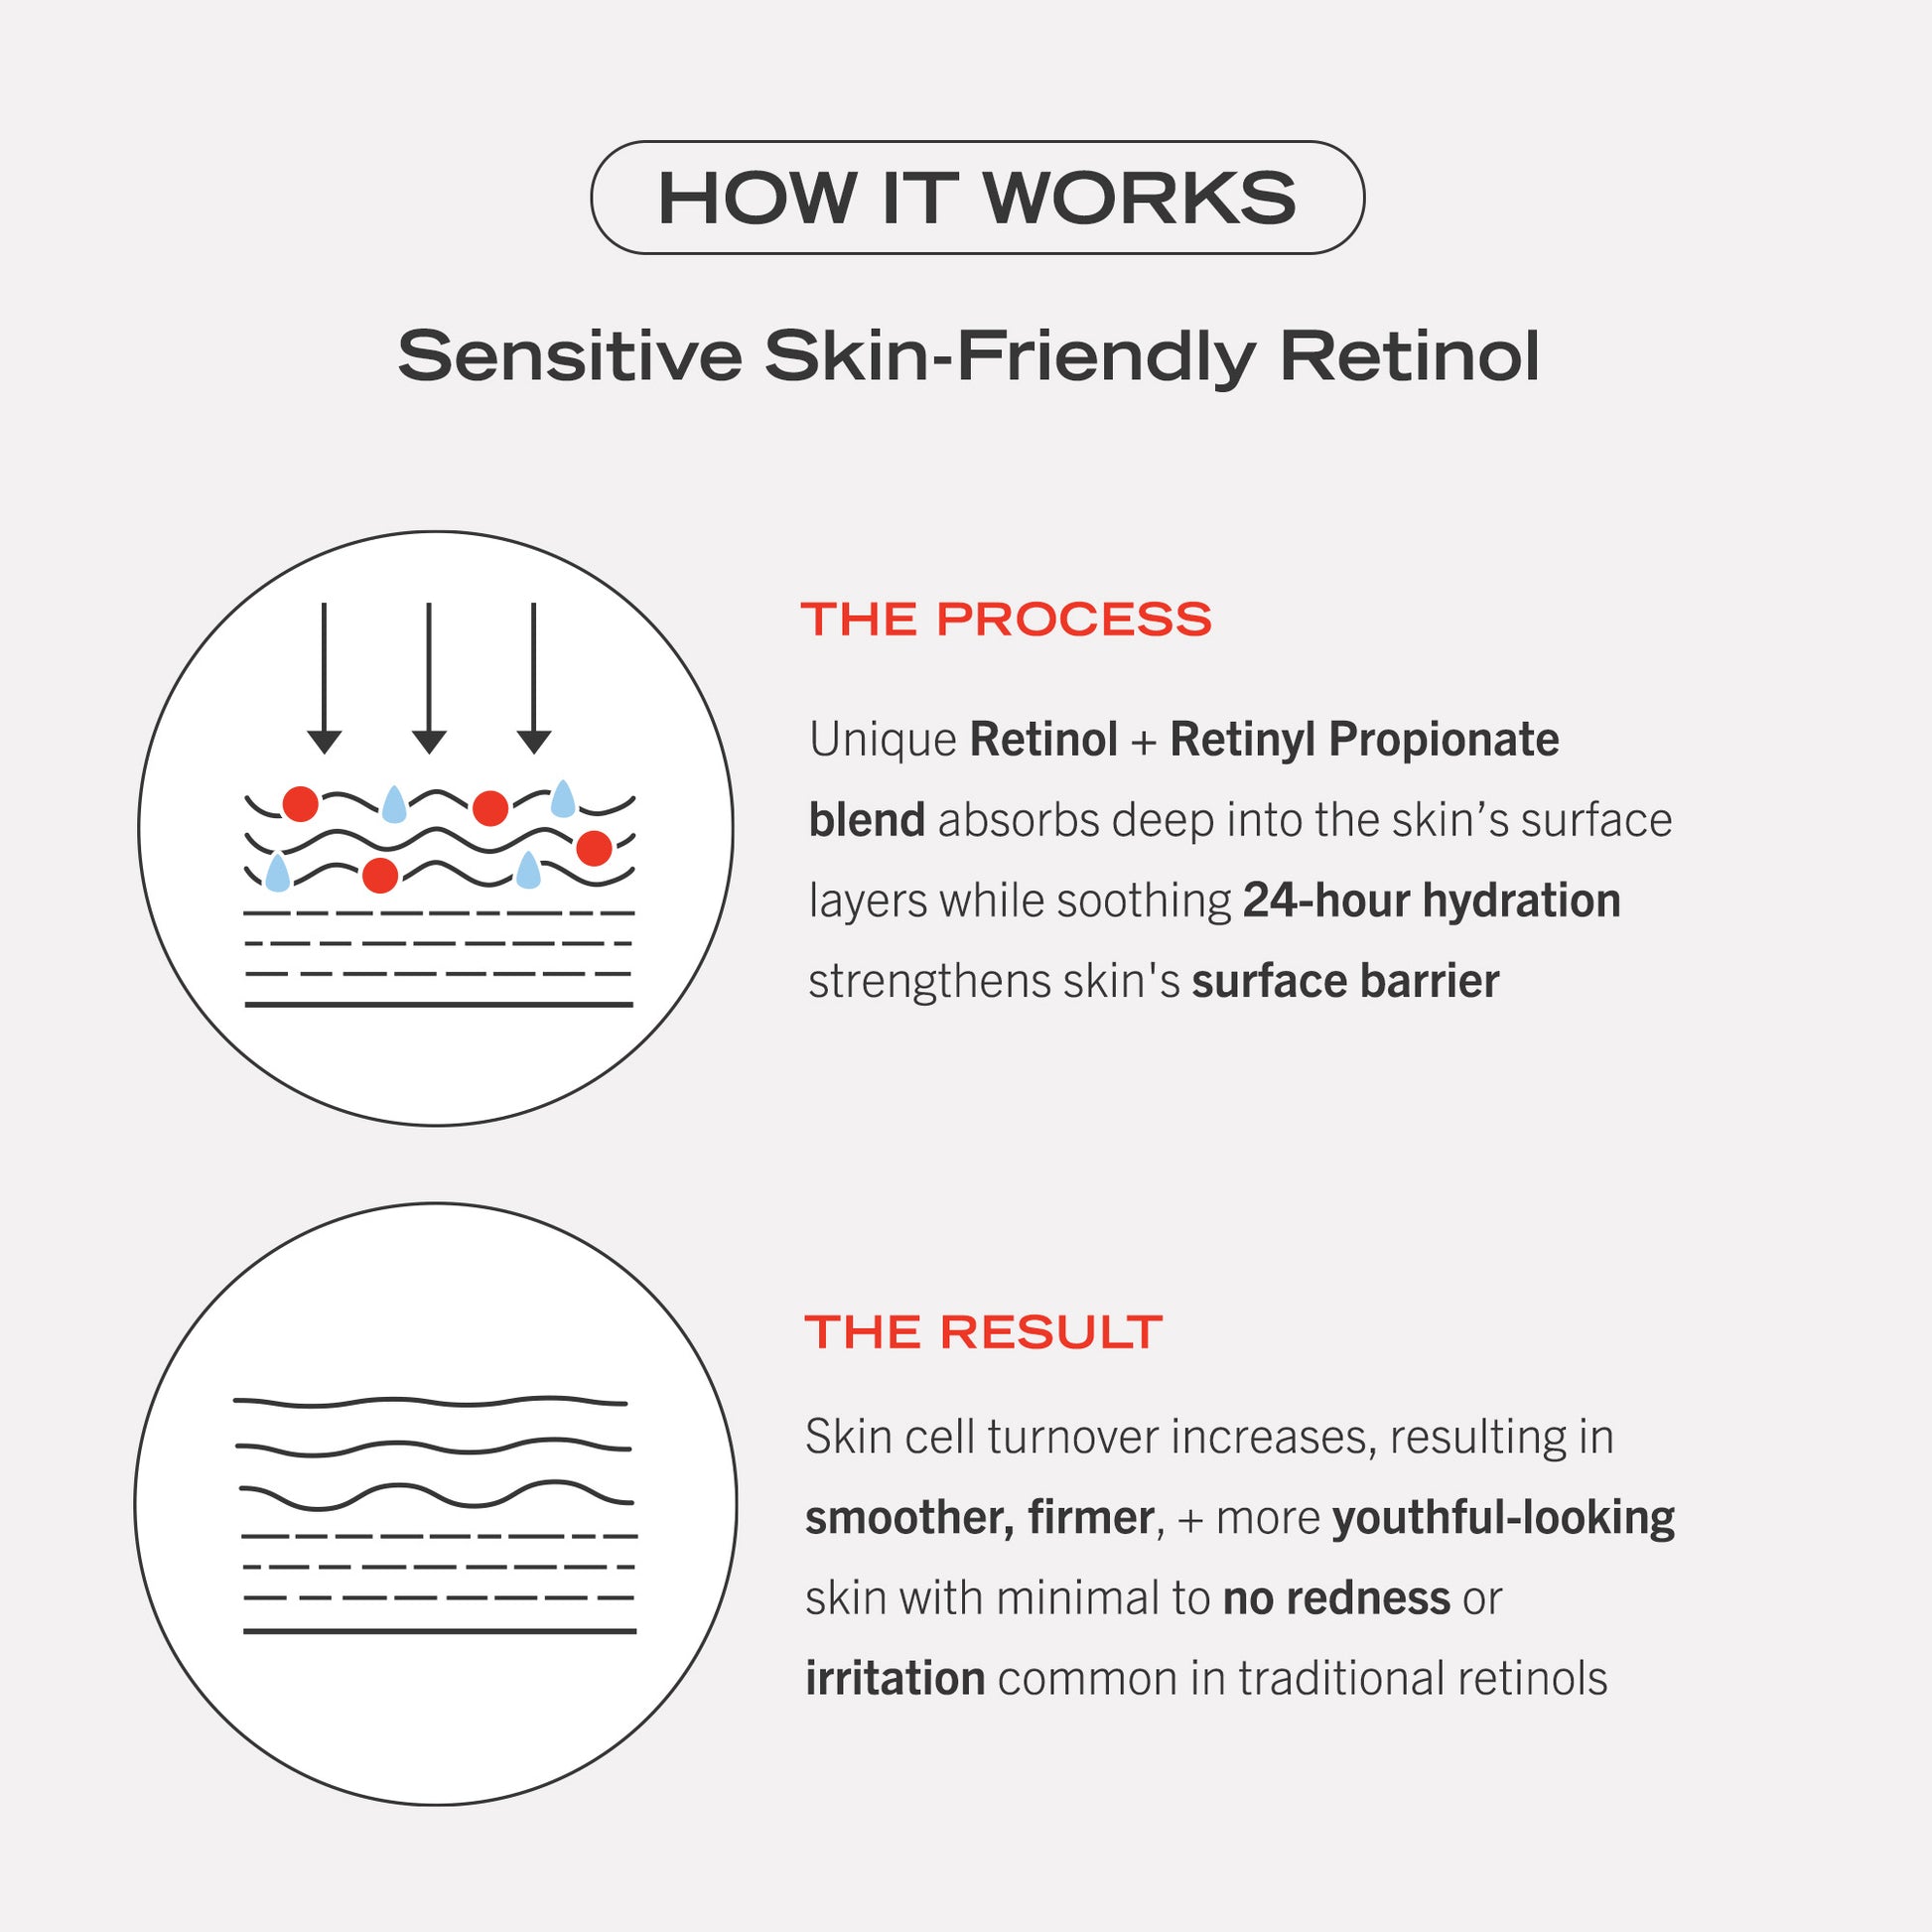 How it Works. Sensitive Skin-Friendly Retinol. The Process and the Result.